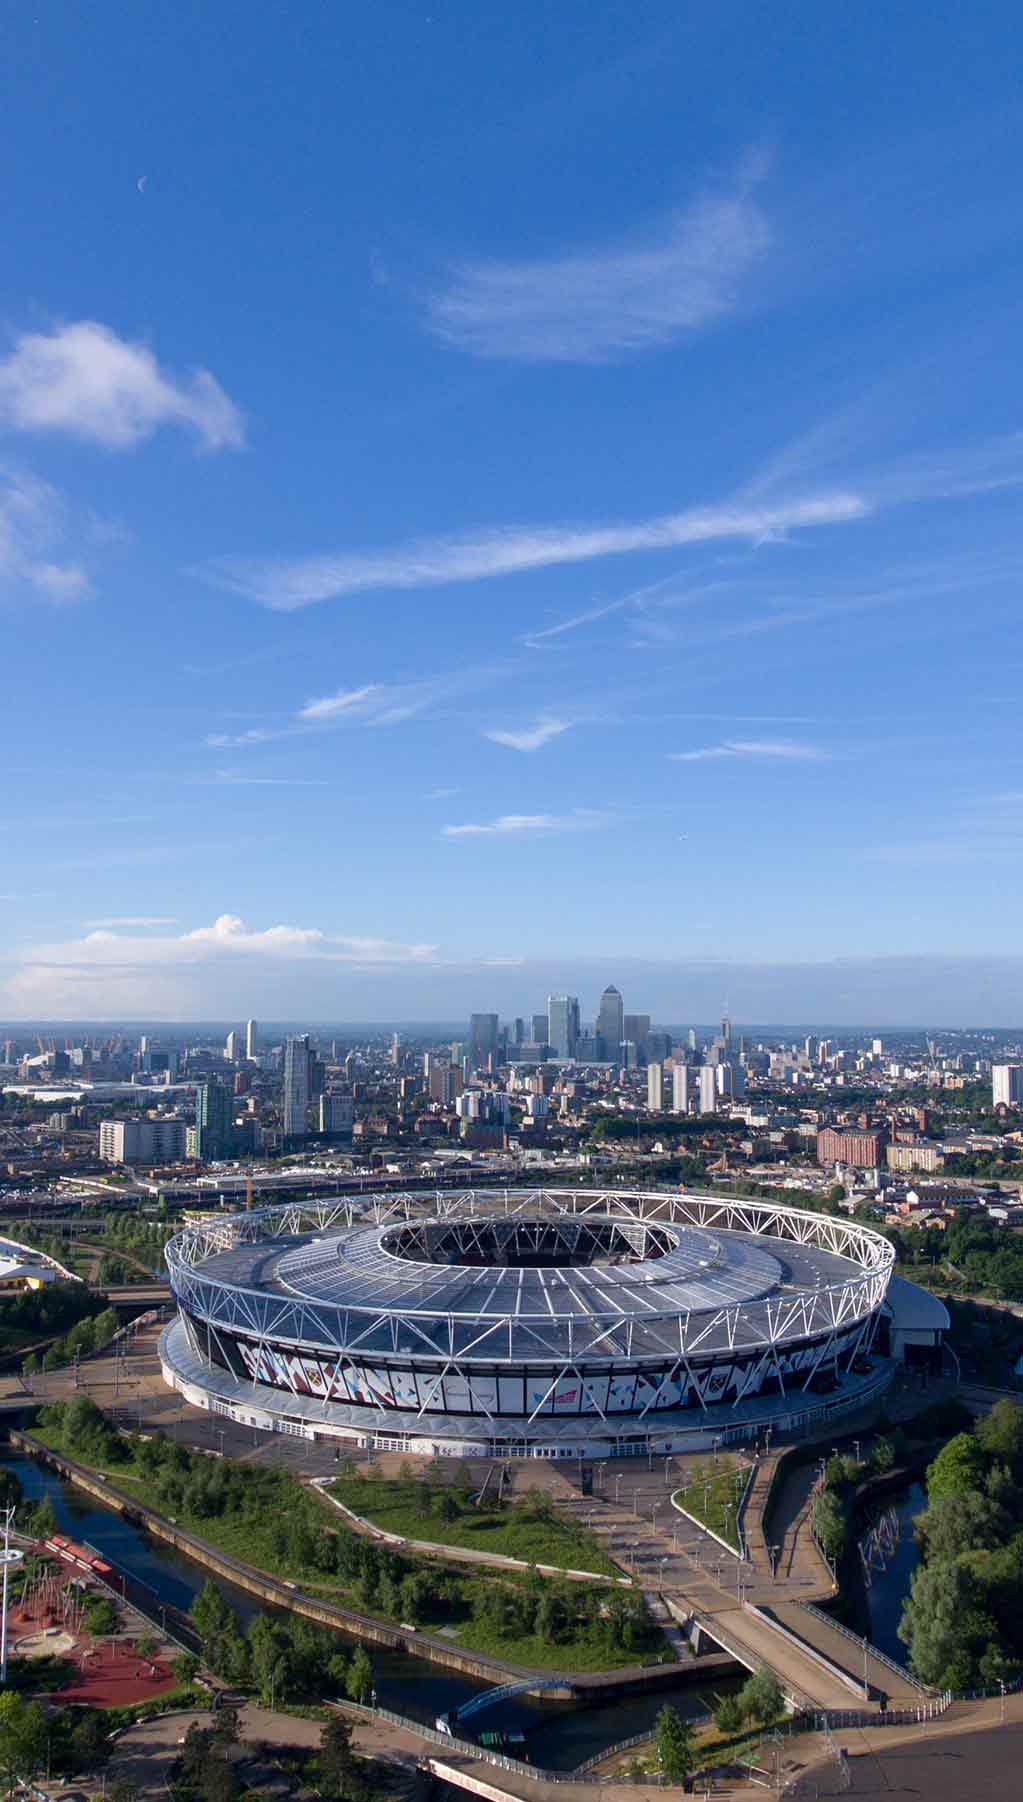 Image of the Olympic Stadium and surrounding area in Stratford